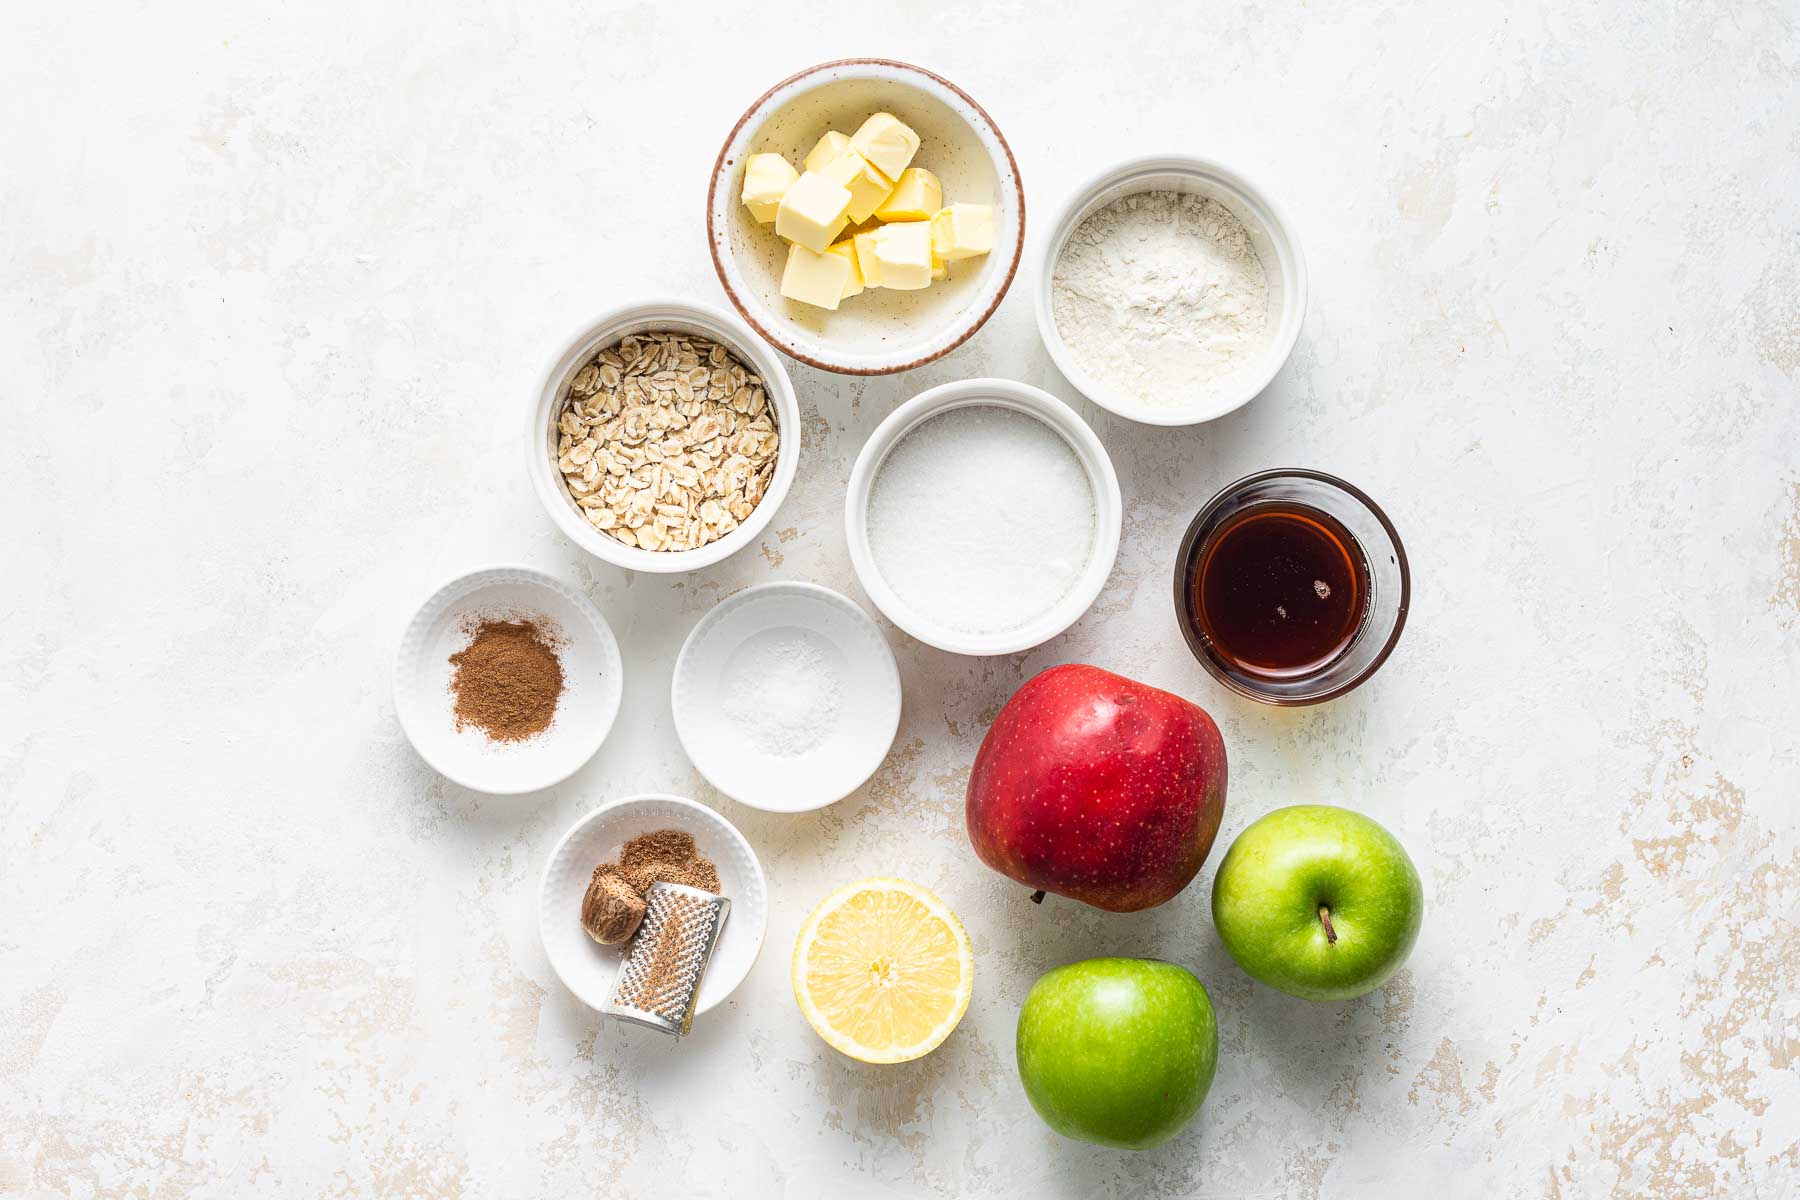 Ingredients to make an apple crisp for two.